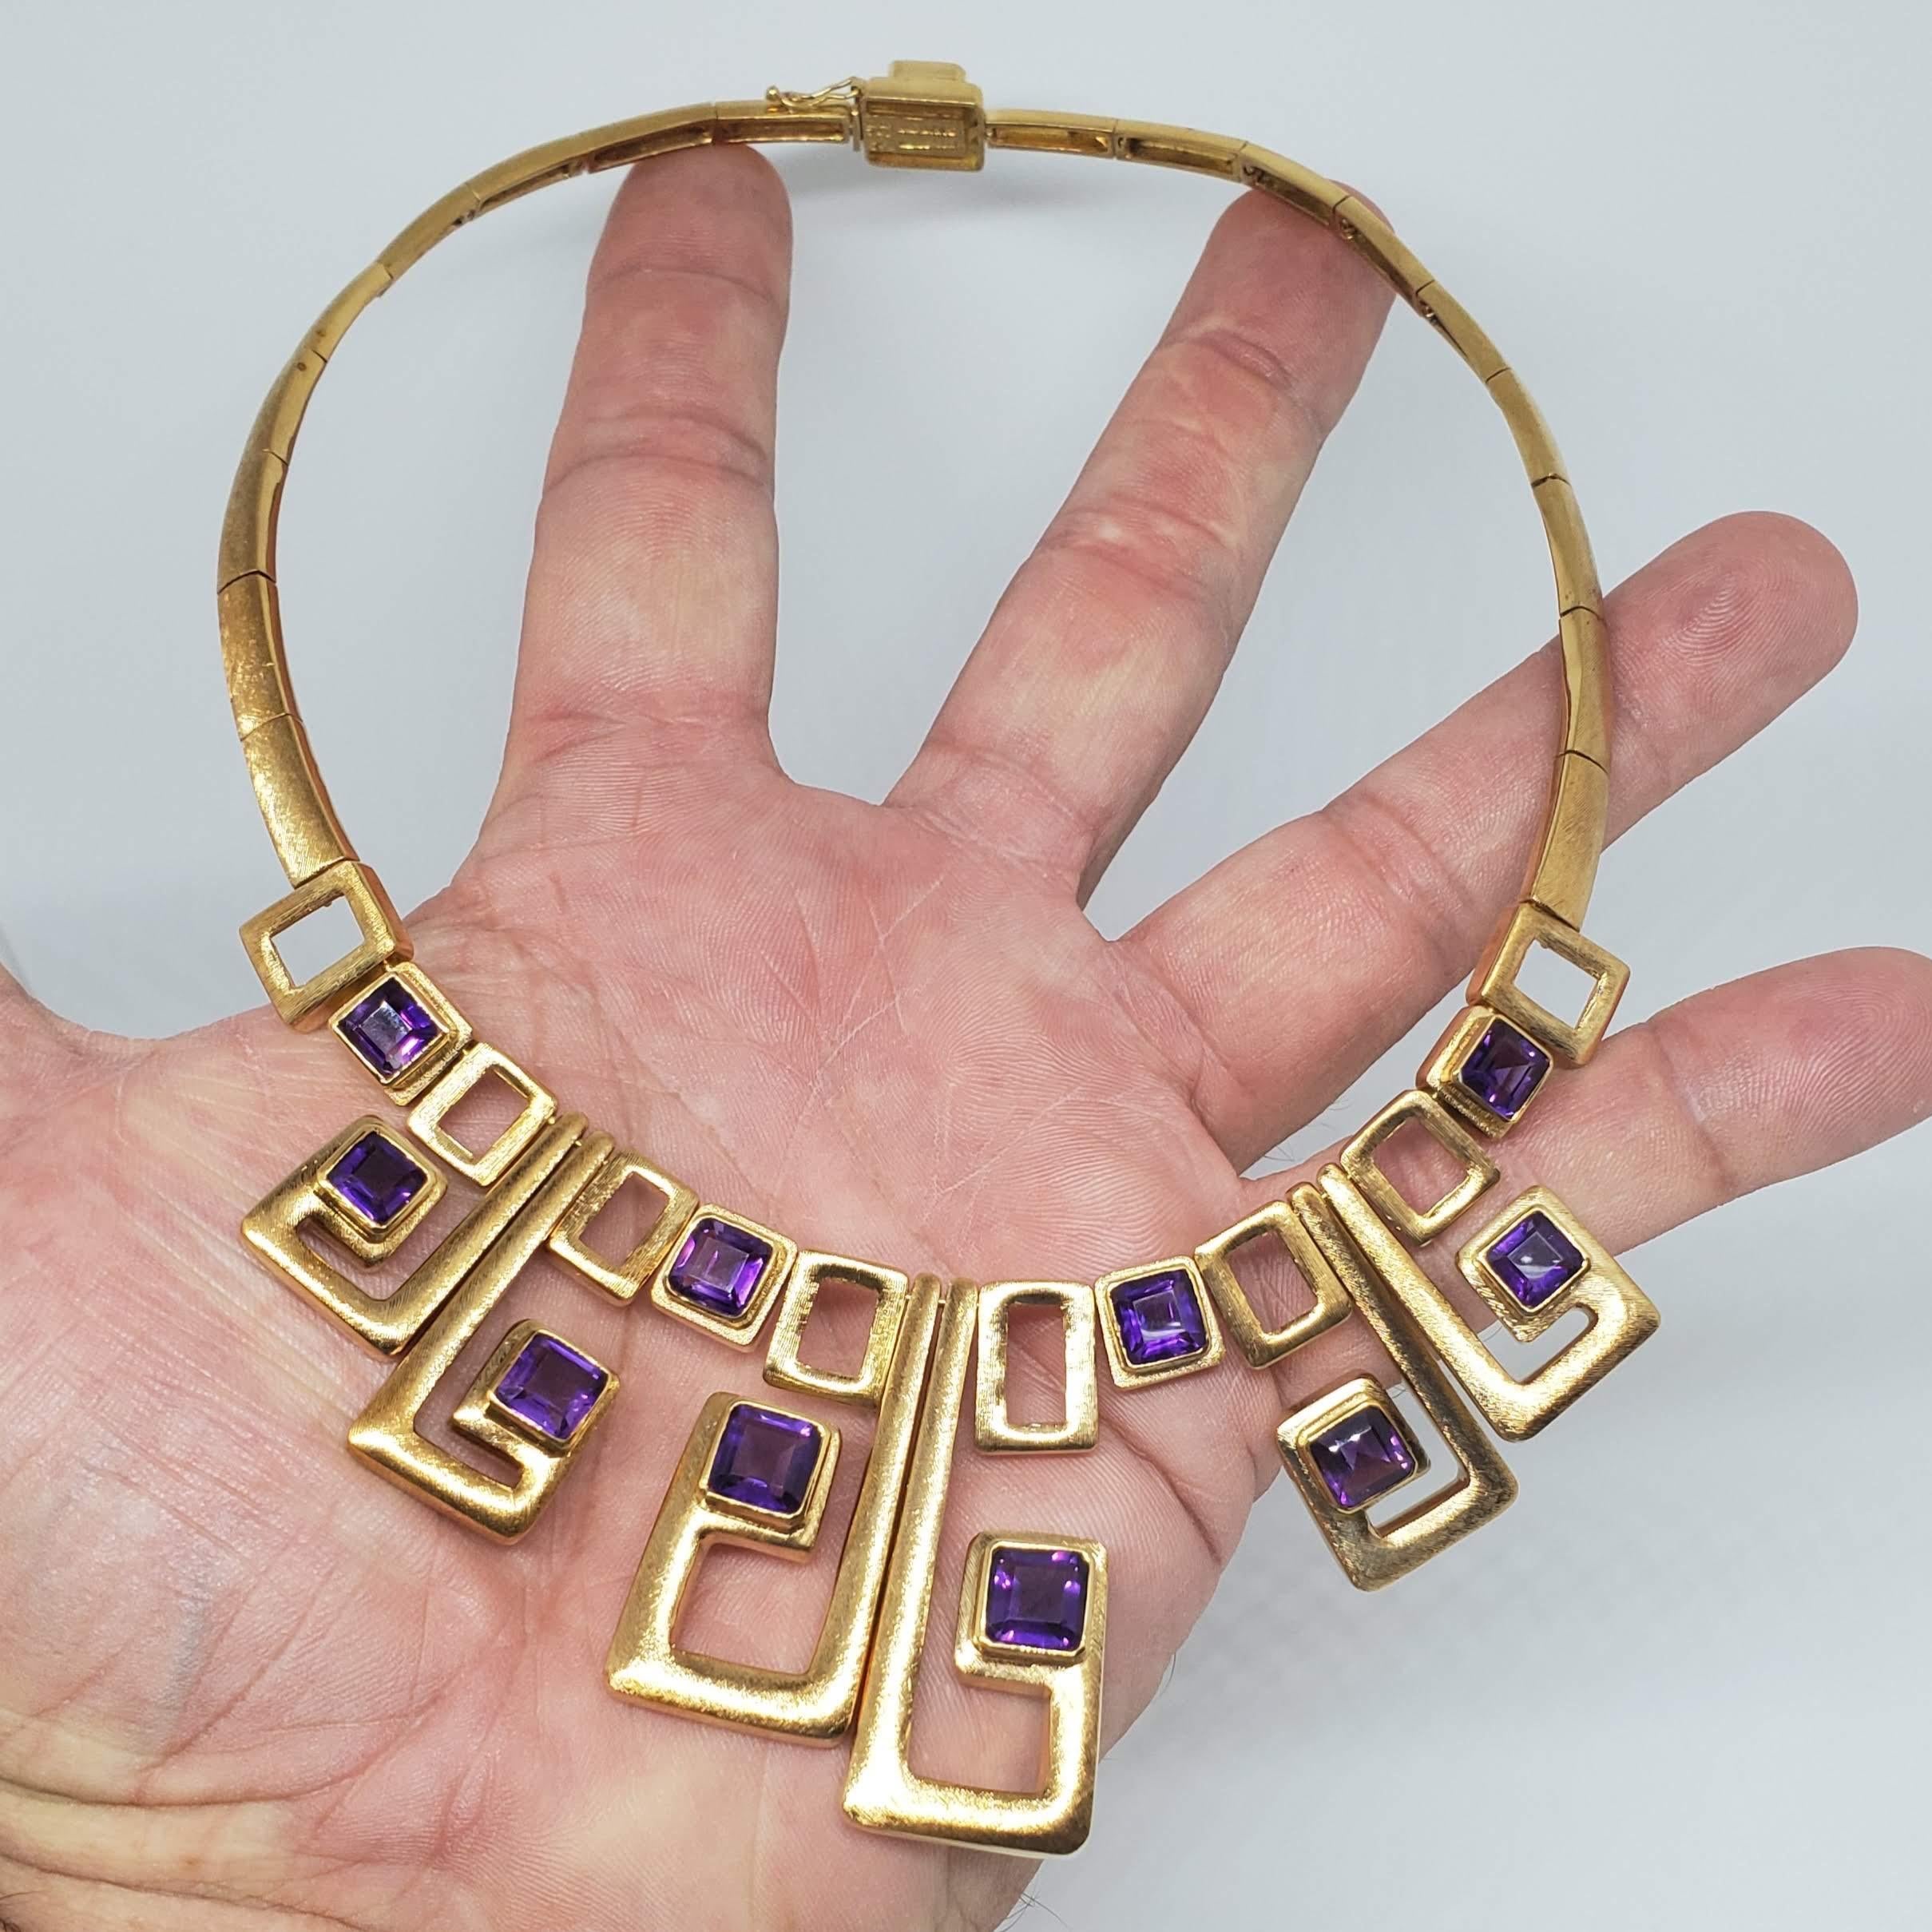 Burle Marx 18 Karat Gold Amethyst Necklace In Excellent Condition For Sale In Woodway, TX